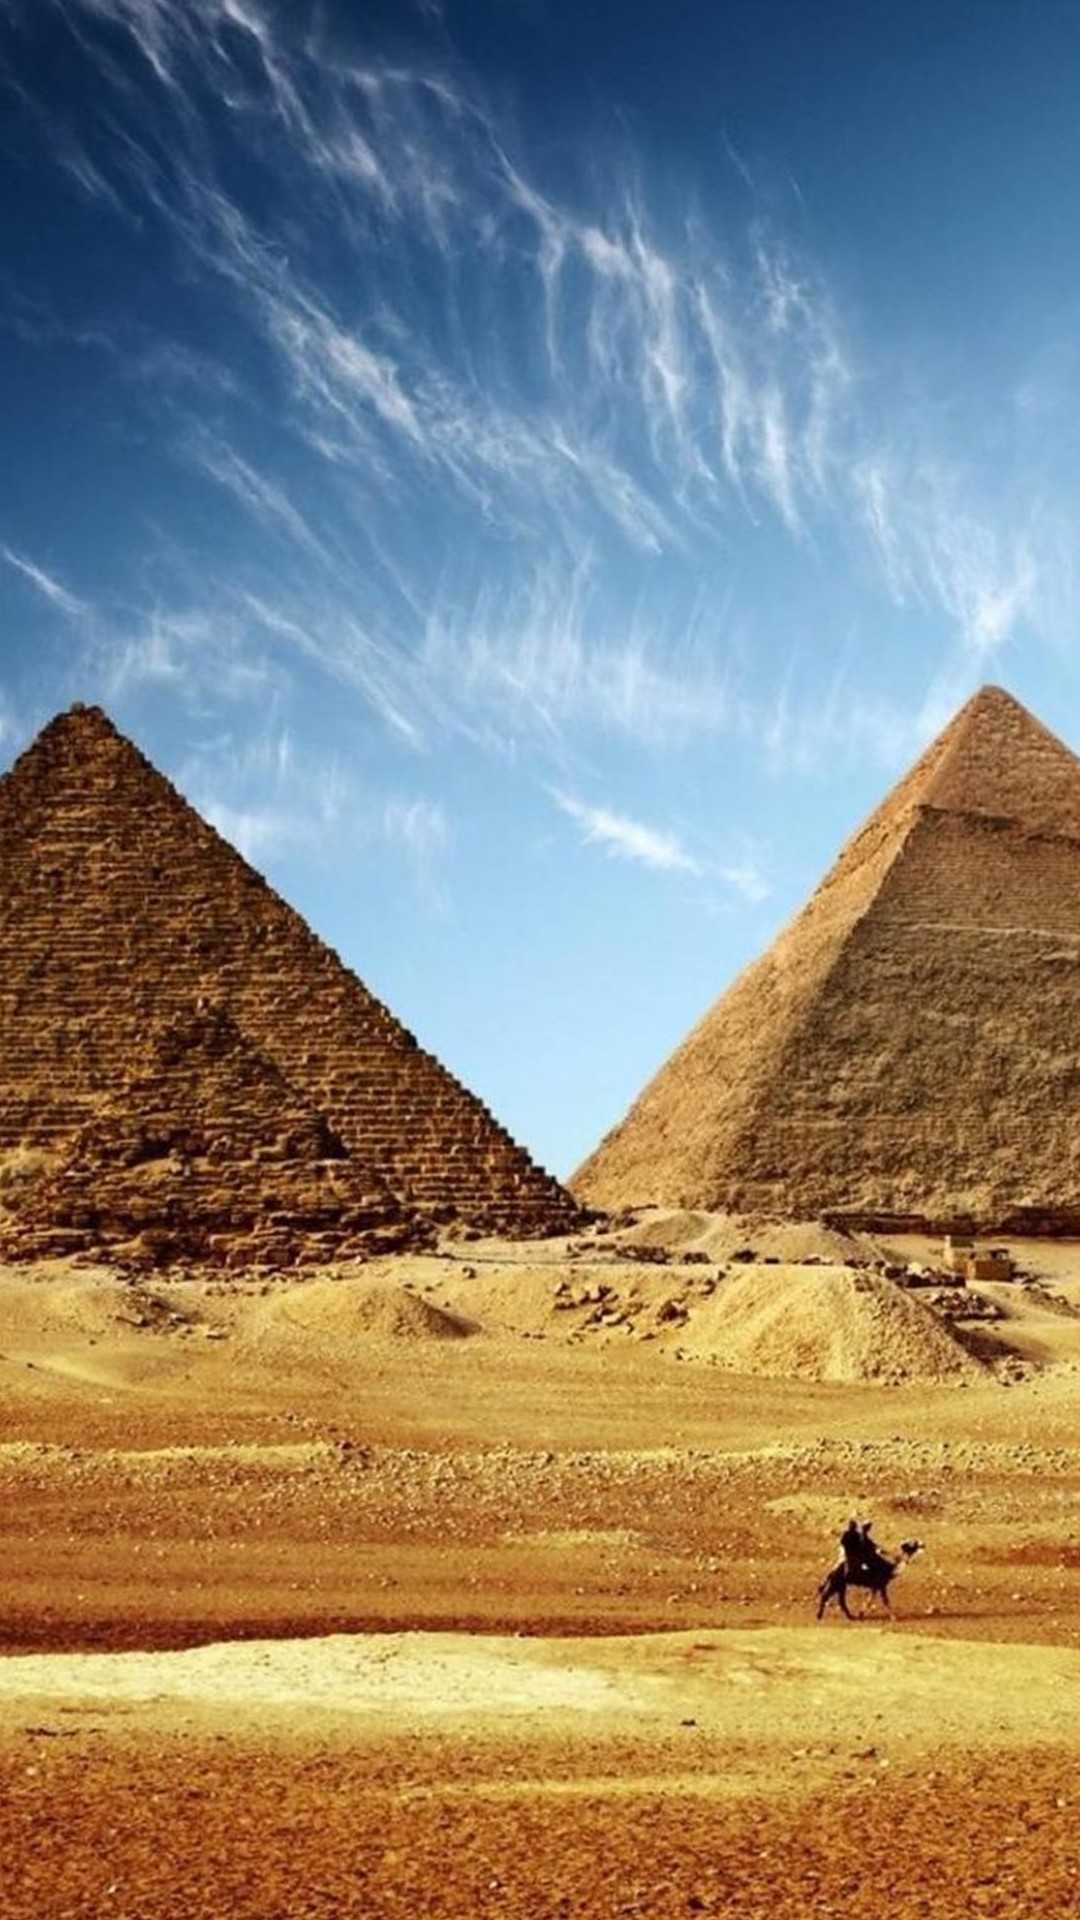 Samsung Galaxy Note 3 Wallpapers - Pyramids Of Giza Iphone , HD Wallpaper & Backgrounds